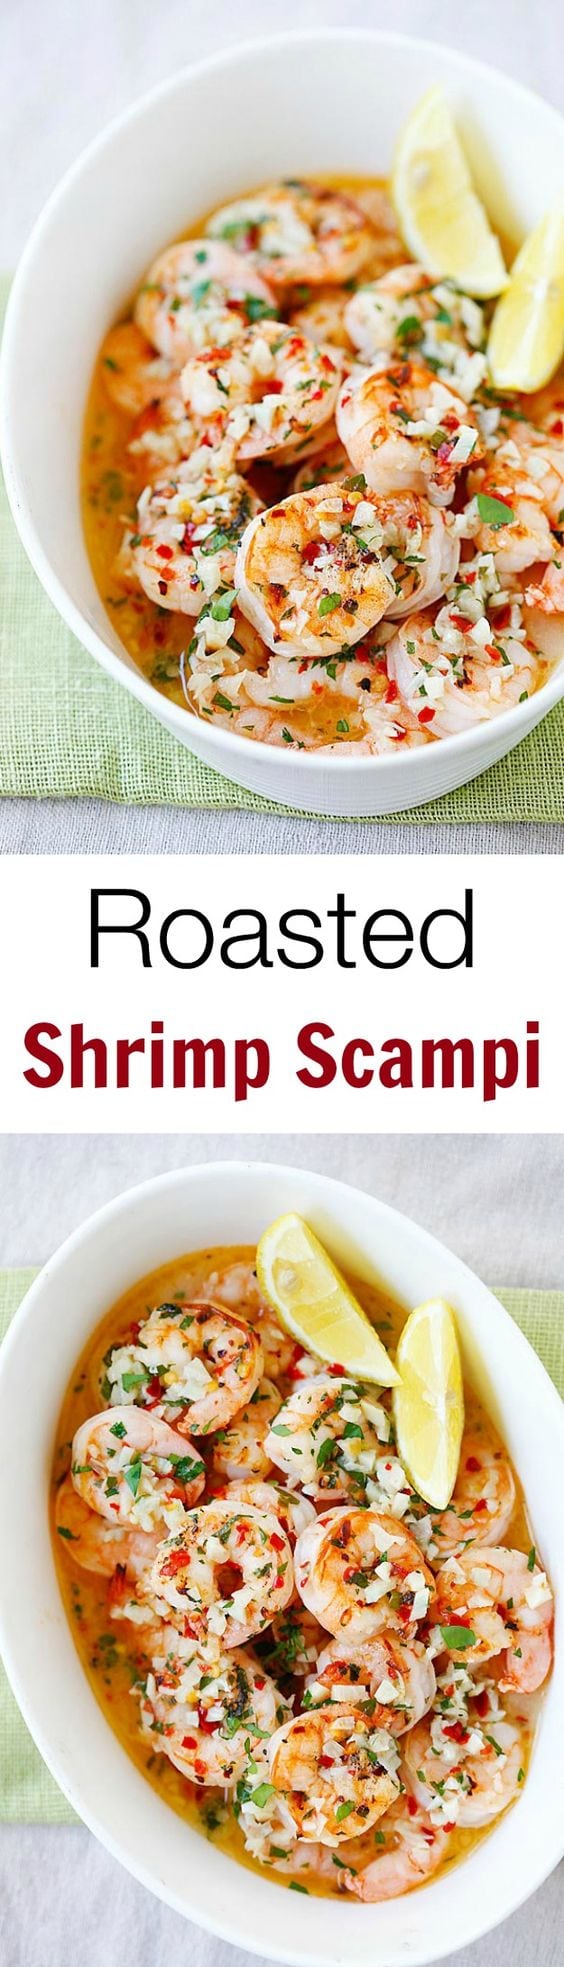 Roasted Shrimp Scampi – the easiest and BEST roasted shrimp scampi ever. 5 mins to prep, 5 mins in the oven and dinner is ready for the entire family | rasamalaysia.com